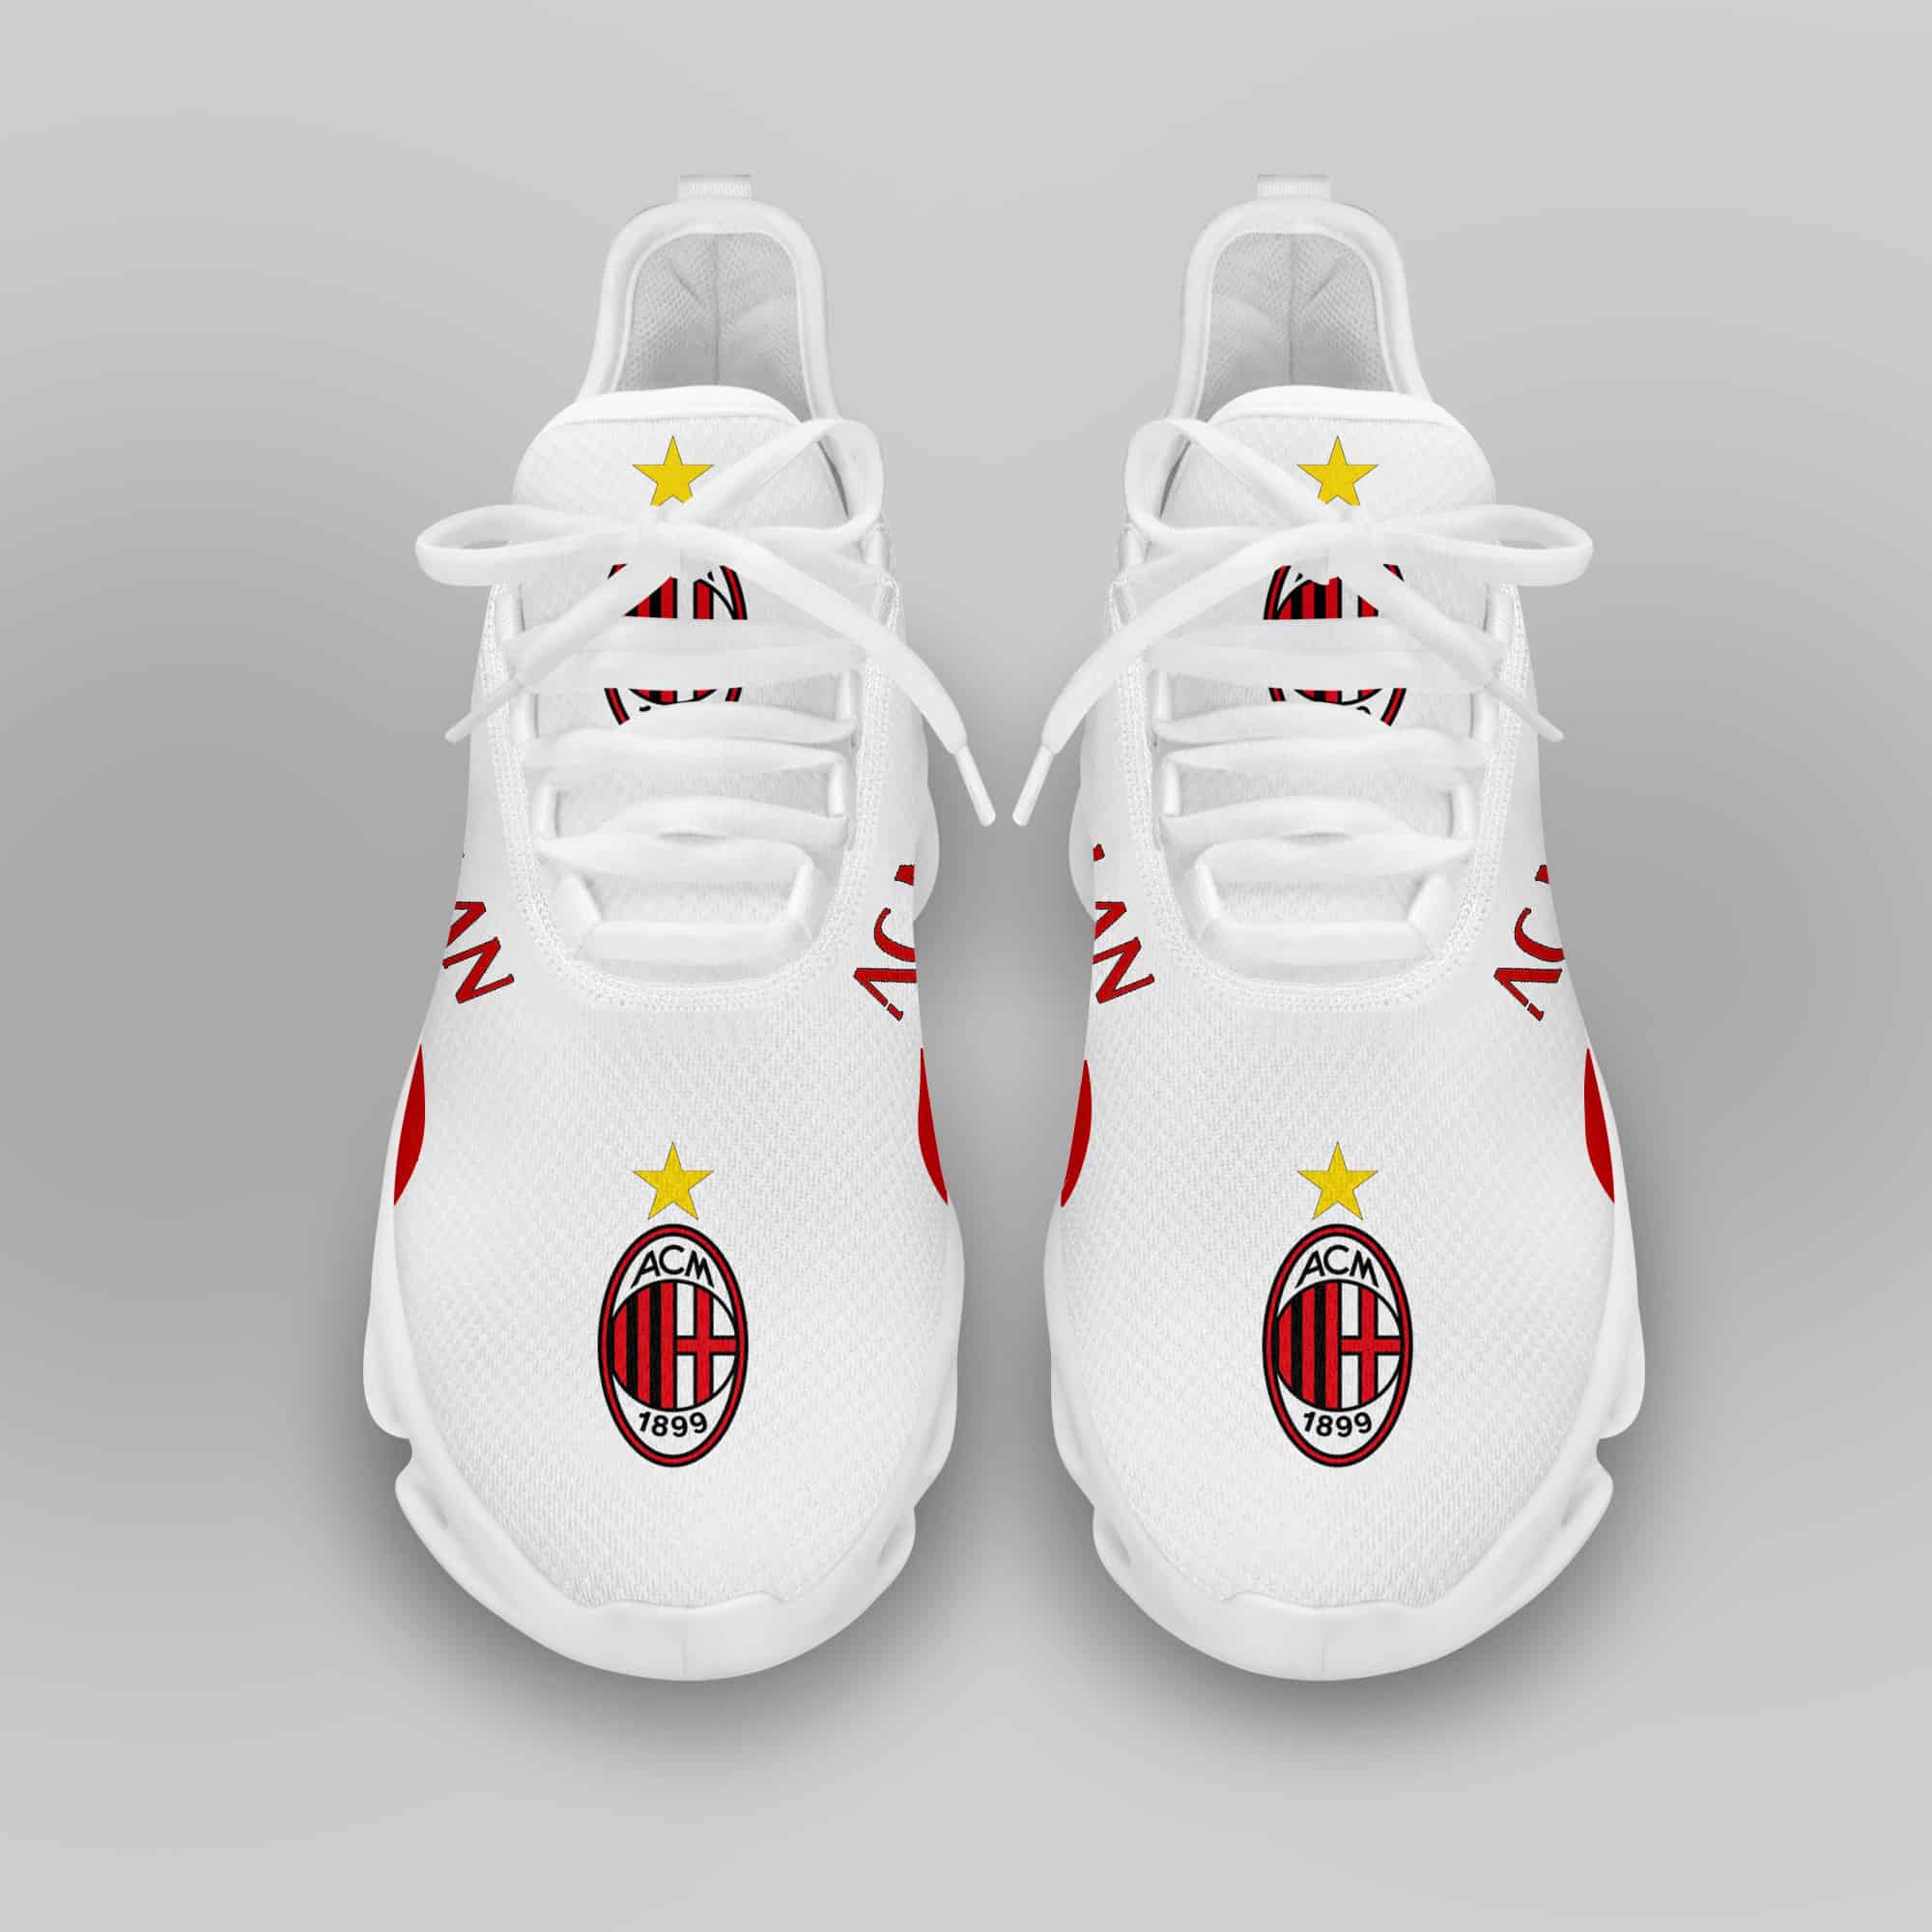 Ac Milan Running Shoes Max Soul Shoes Sneakers Ver 4 3